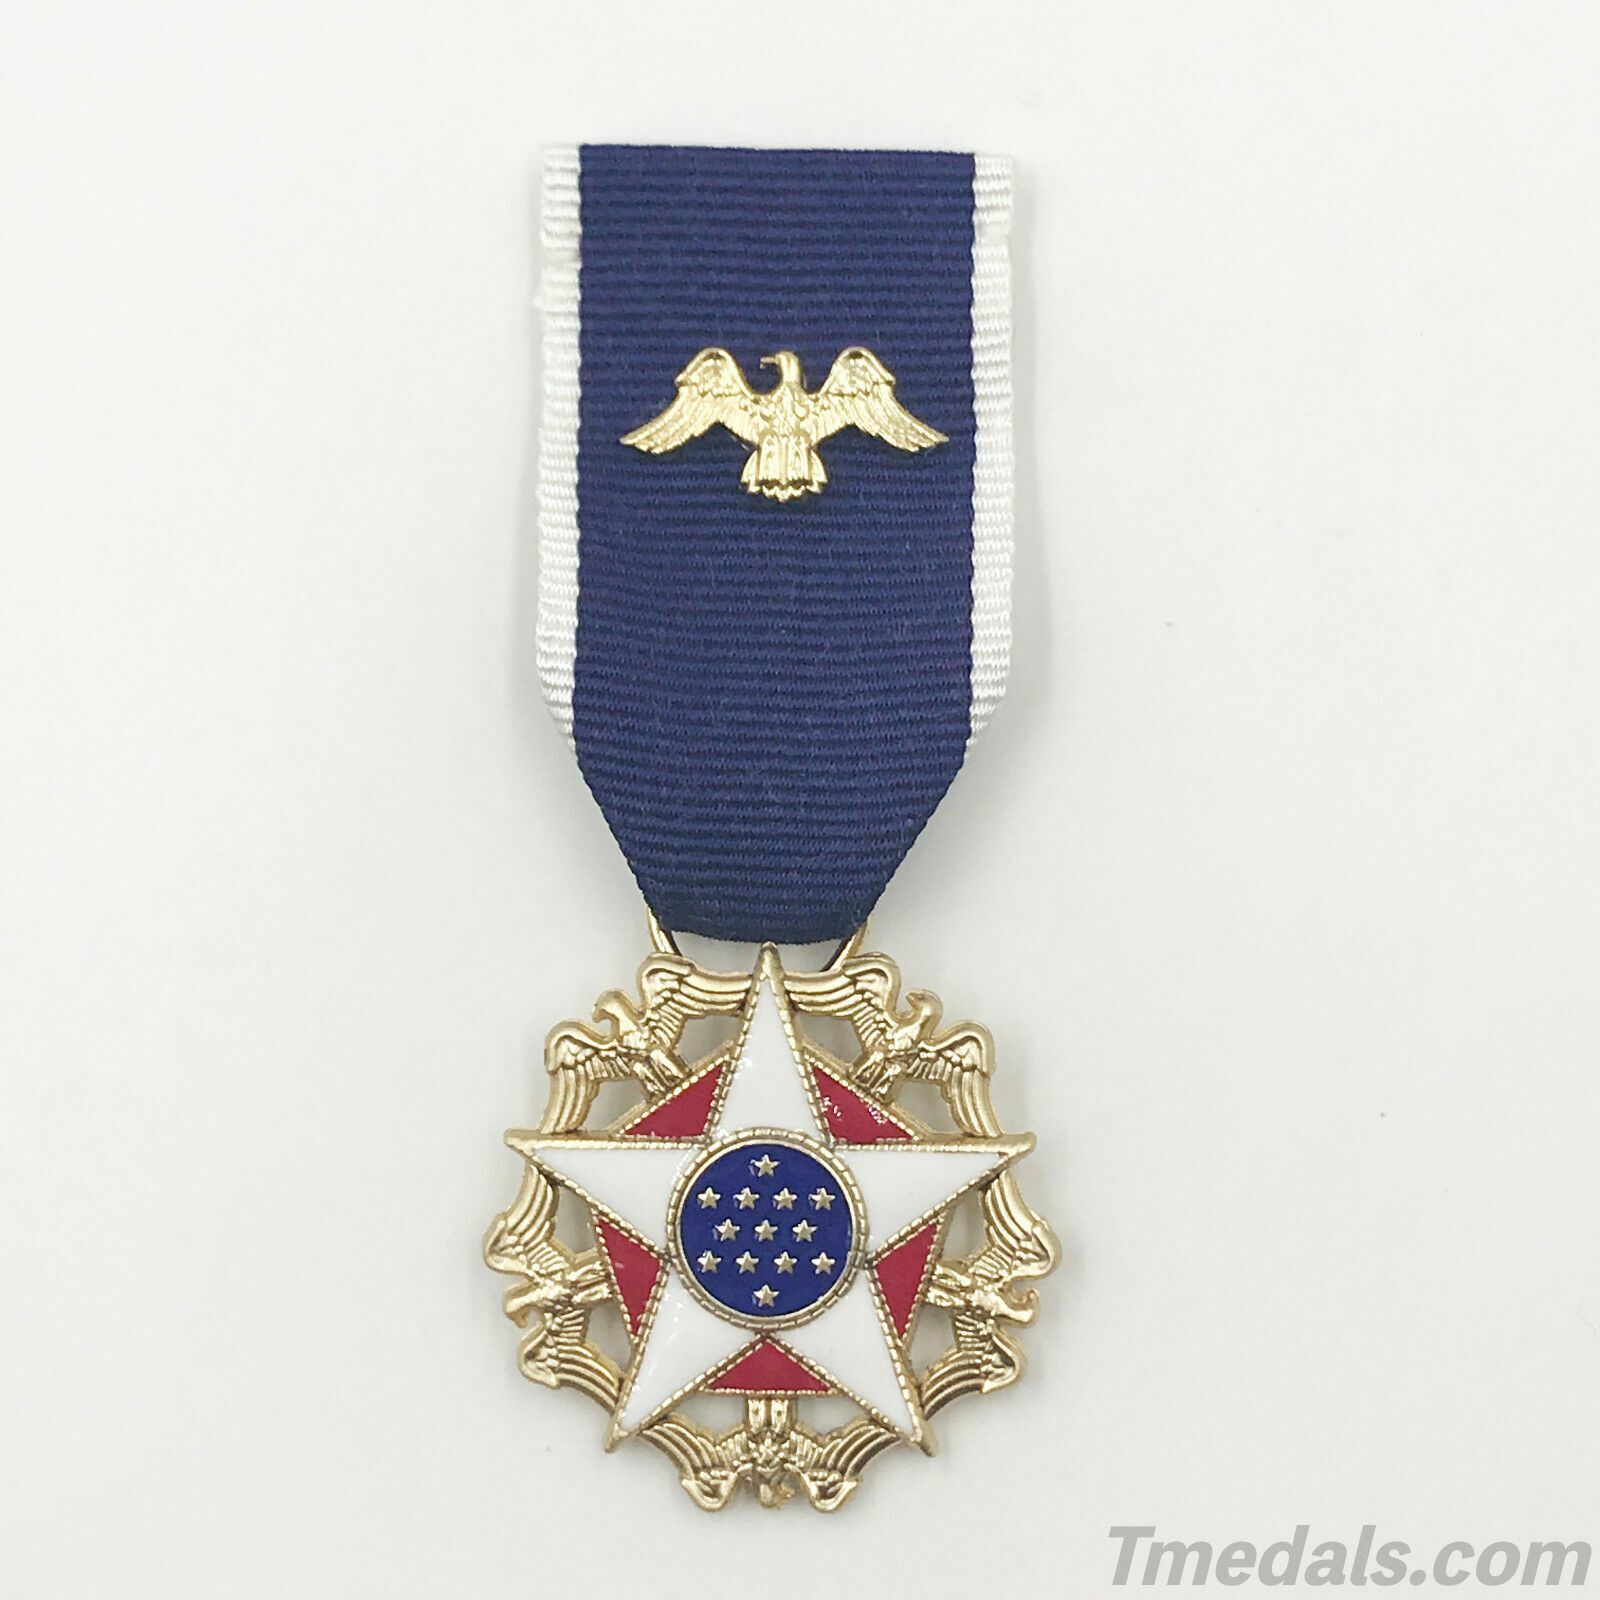 U.S. Order Presidential Medal of Freedom with Distinction mini Miniature Tmedals